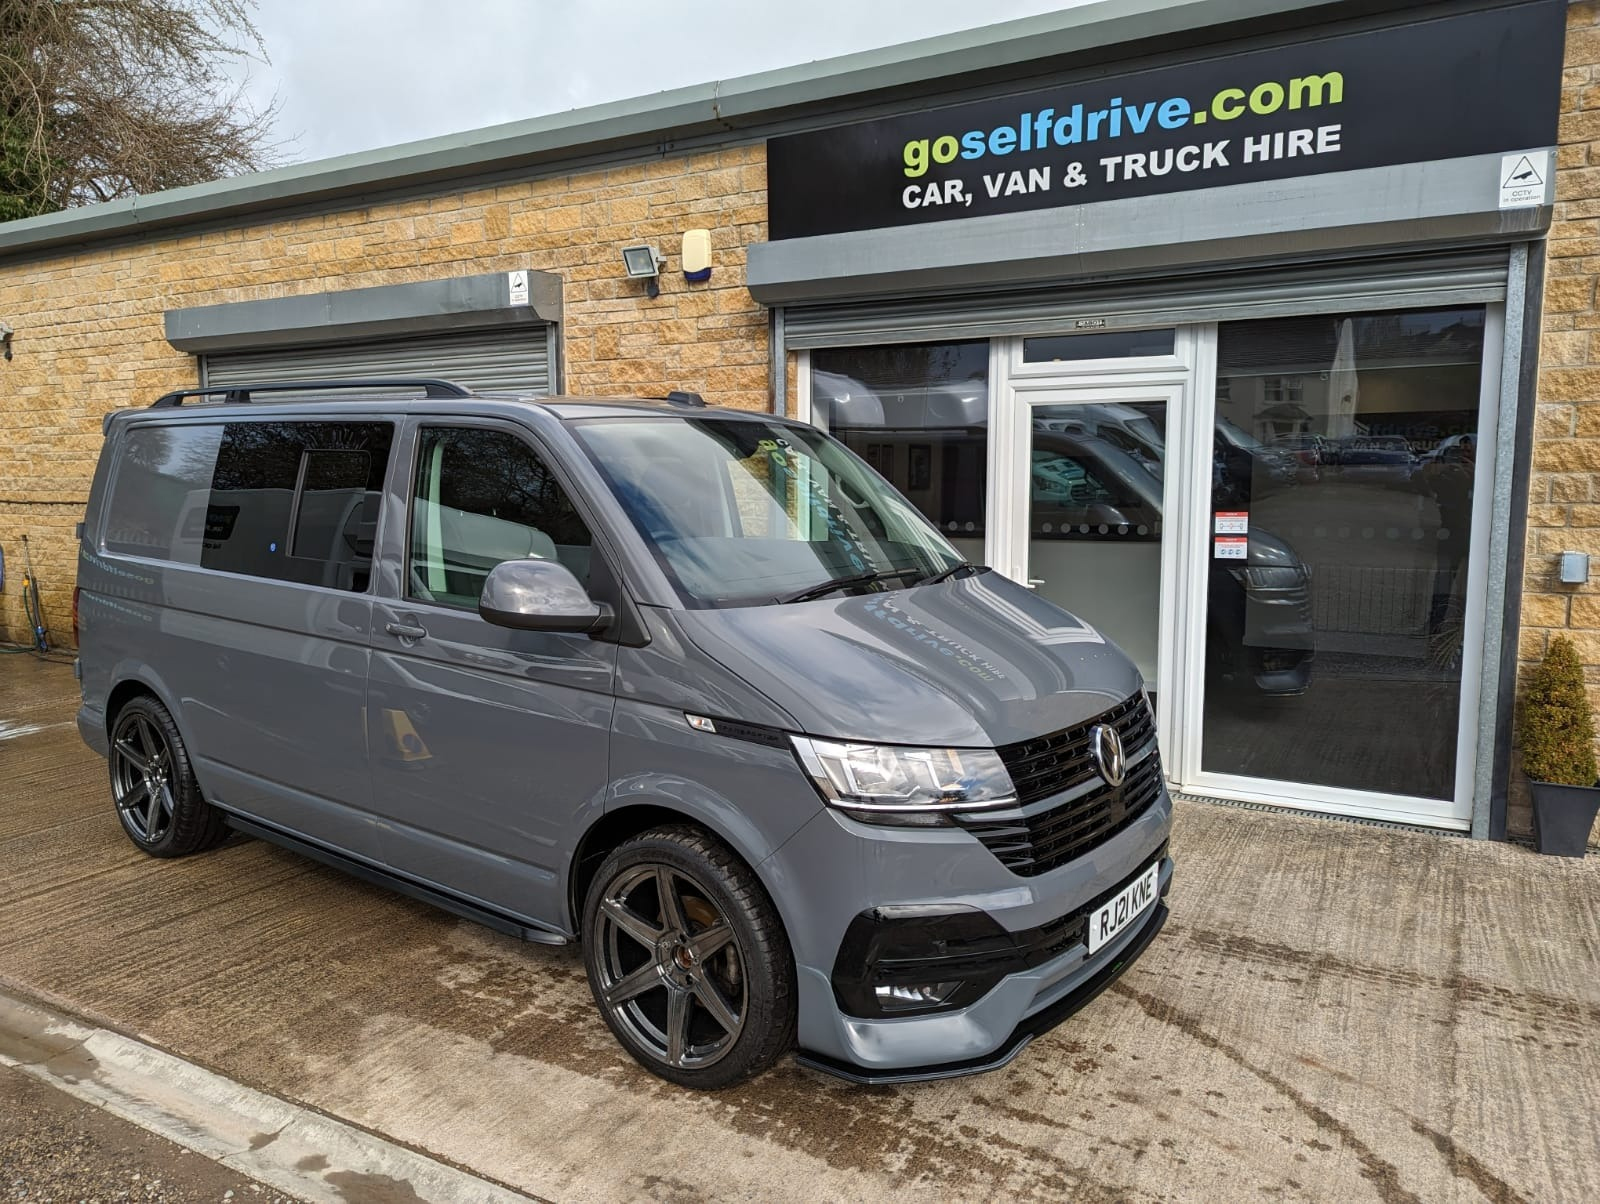 GoSelfDrive.com: Car and Van Contract Hire, Frome, Somerset